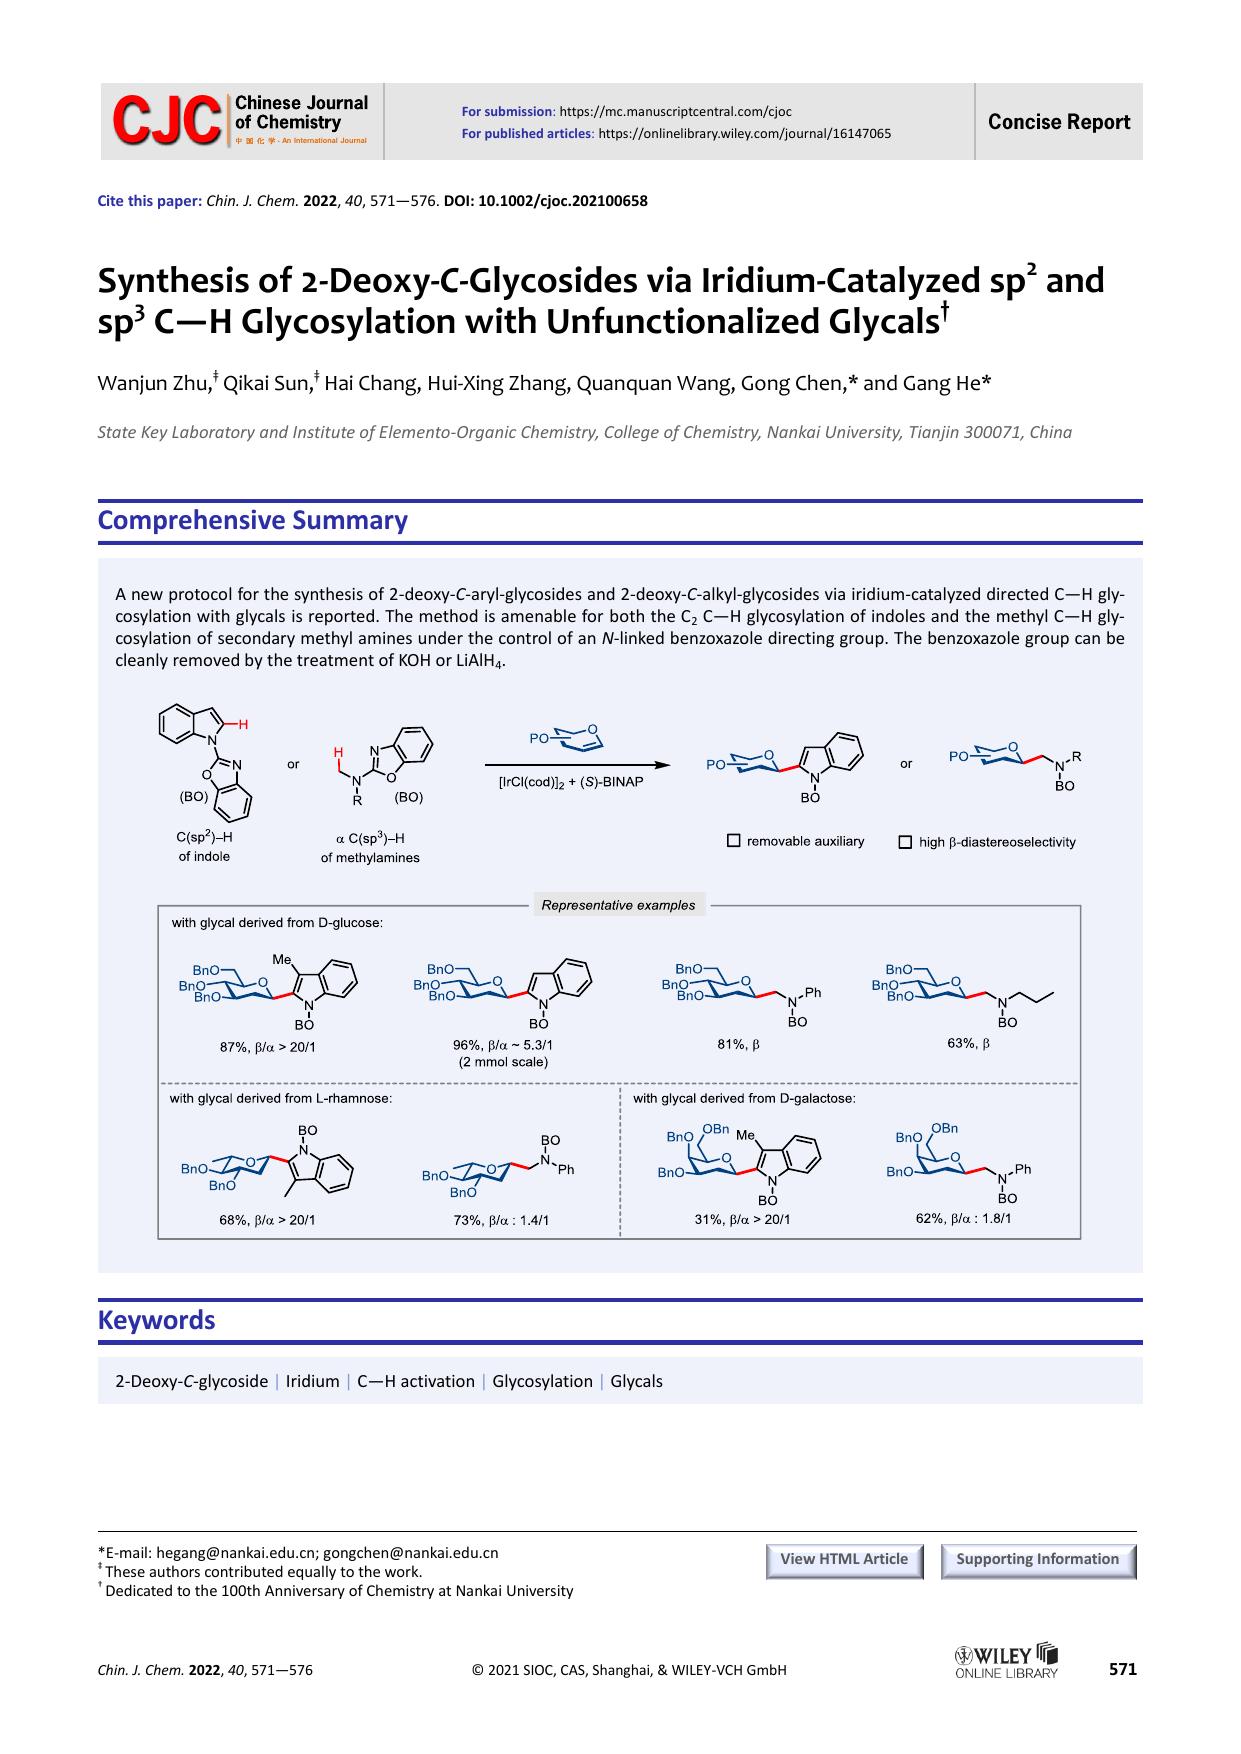 Synthesis of 2-Deoxy-C-Glycosides via Iridium-Catalyzed sp2 and sp3 C-H Glycosylation with Unfunctionalized Glycals by Gang He